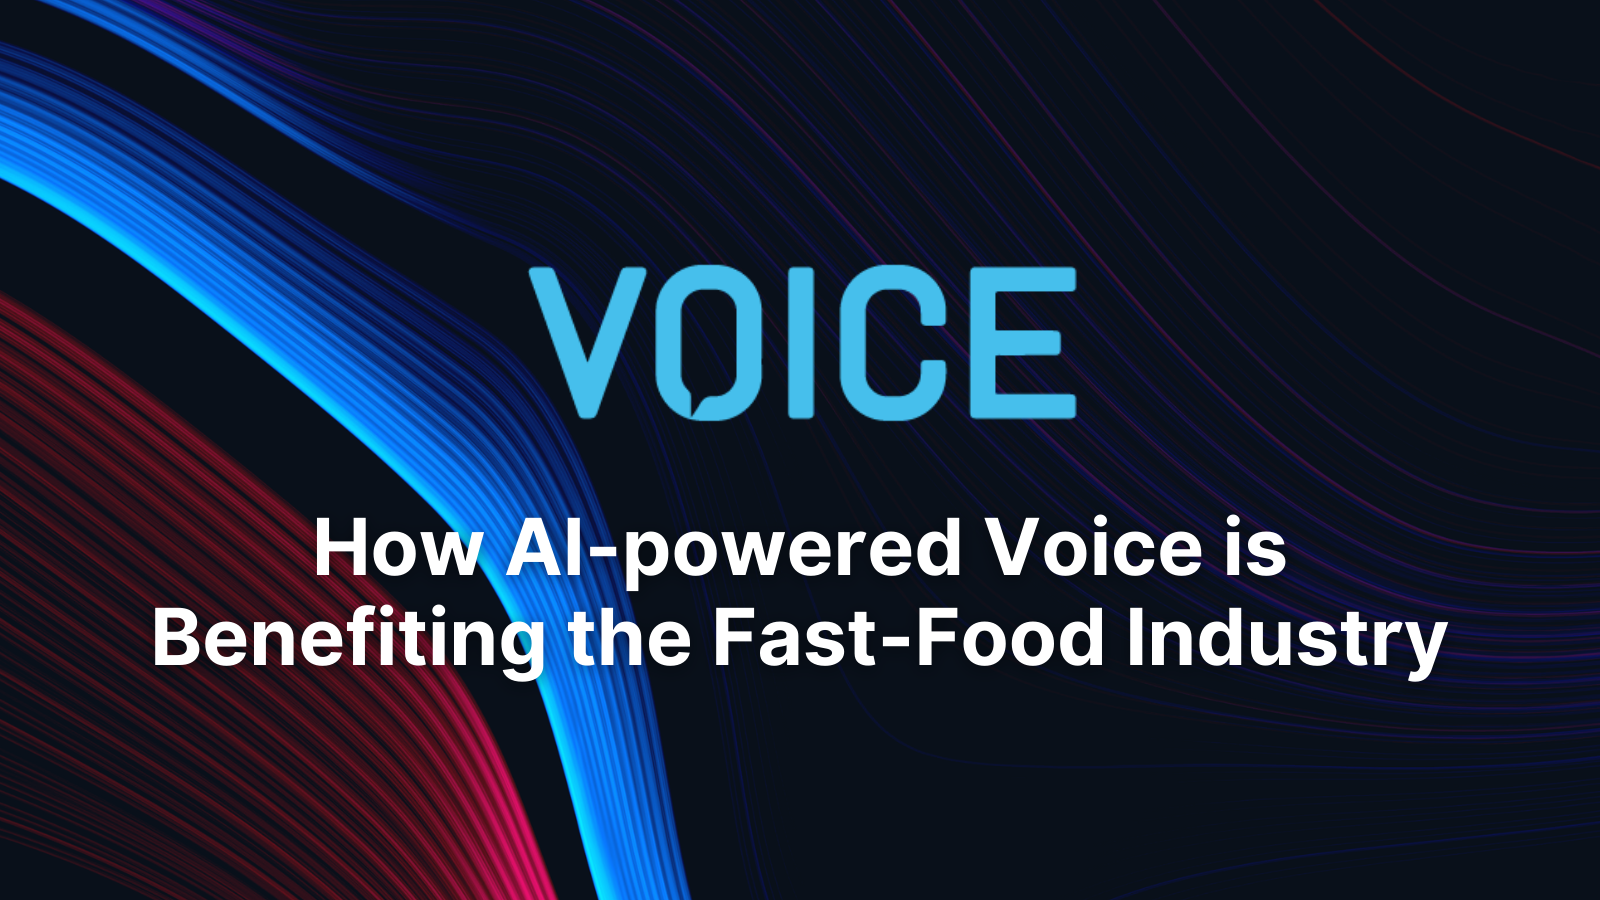 How AI-powered Voice is Benefiting the Fast-Food Industry